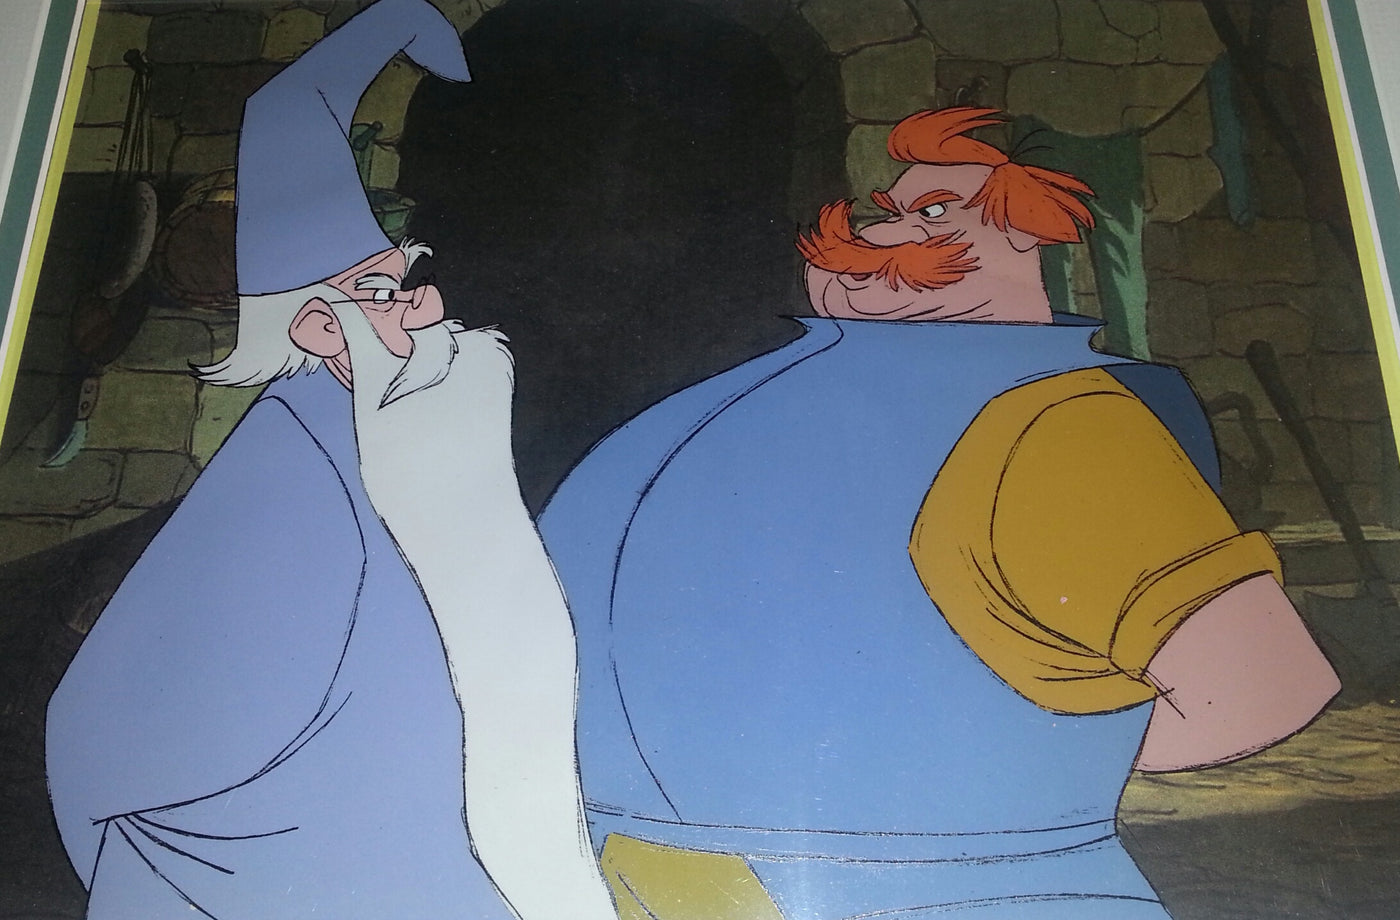 Original Walt Disney Production Cel from The Sword in the Stone featuring Merlin and Sir Ector